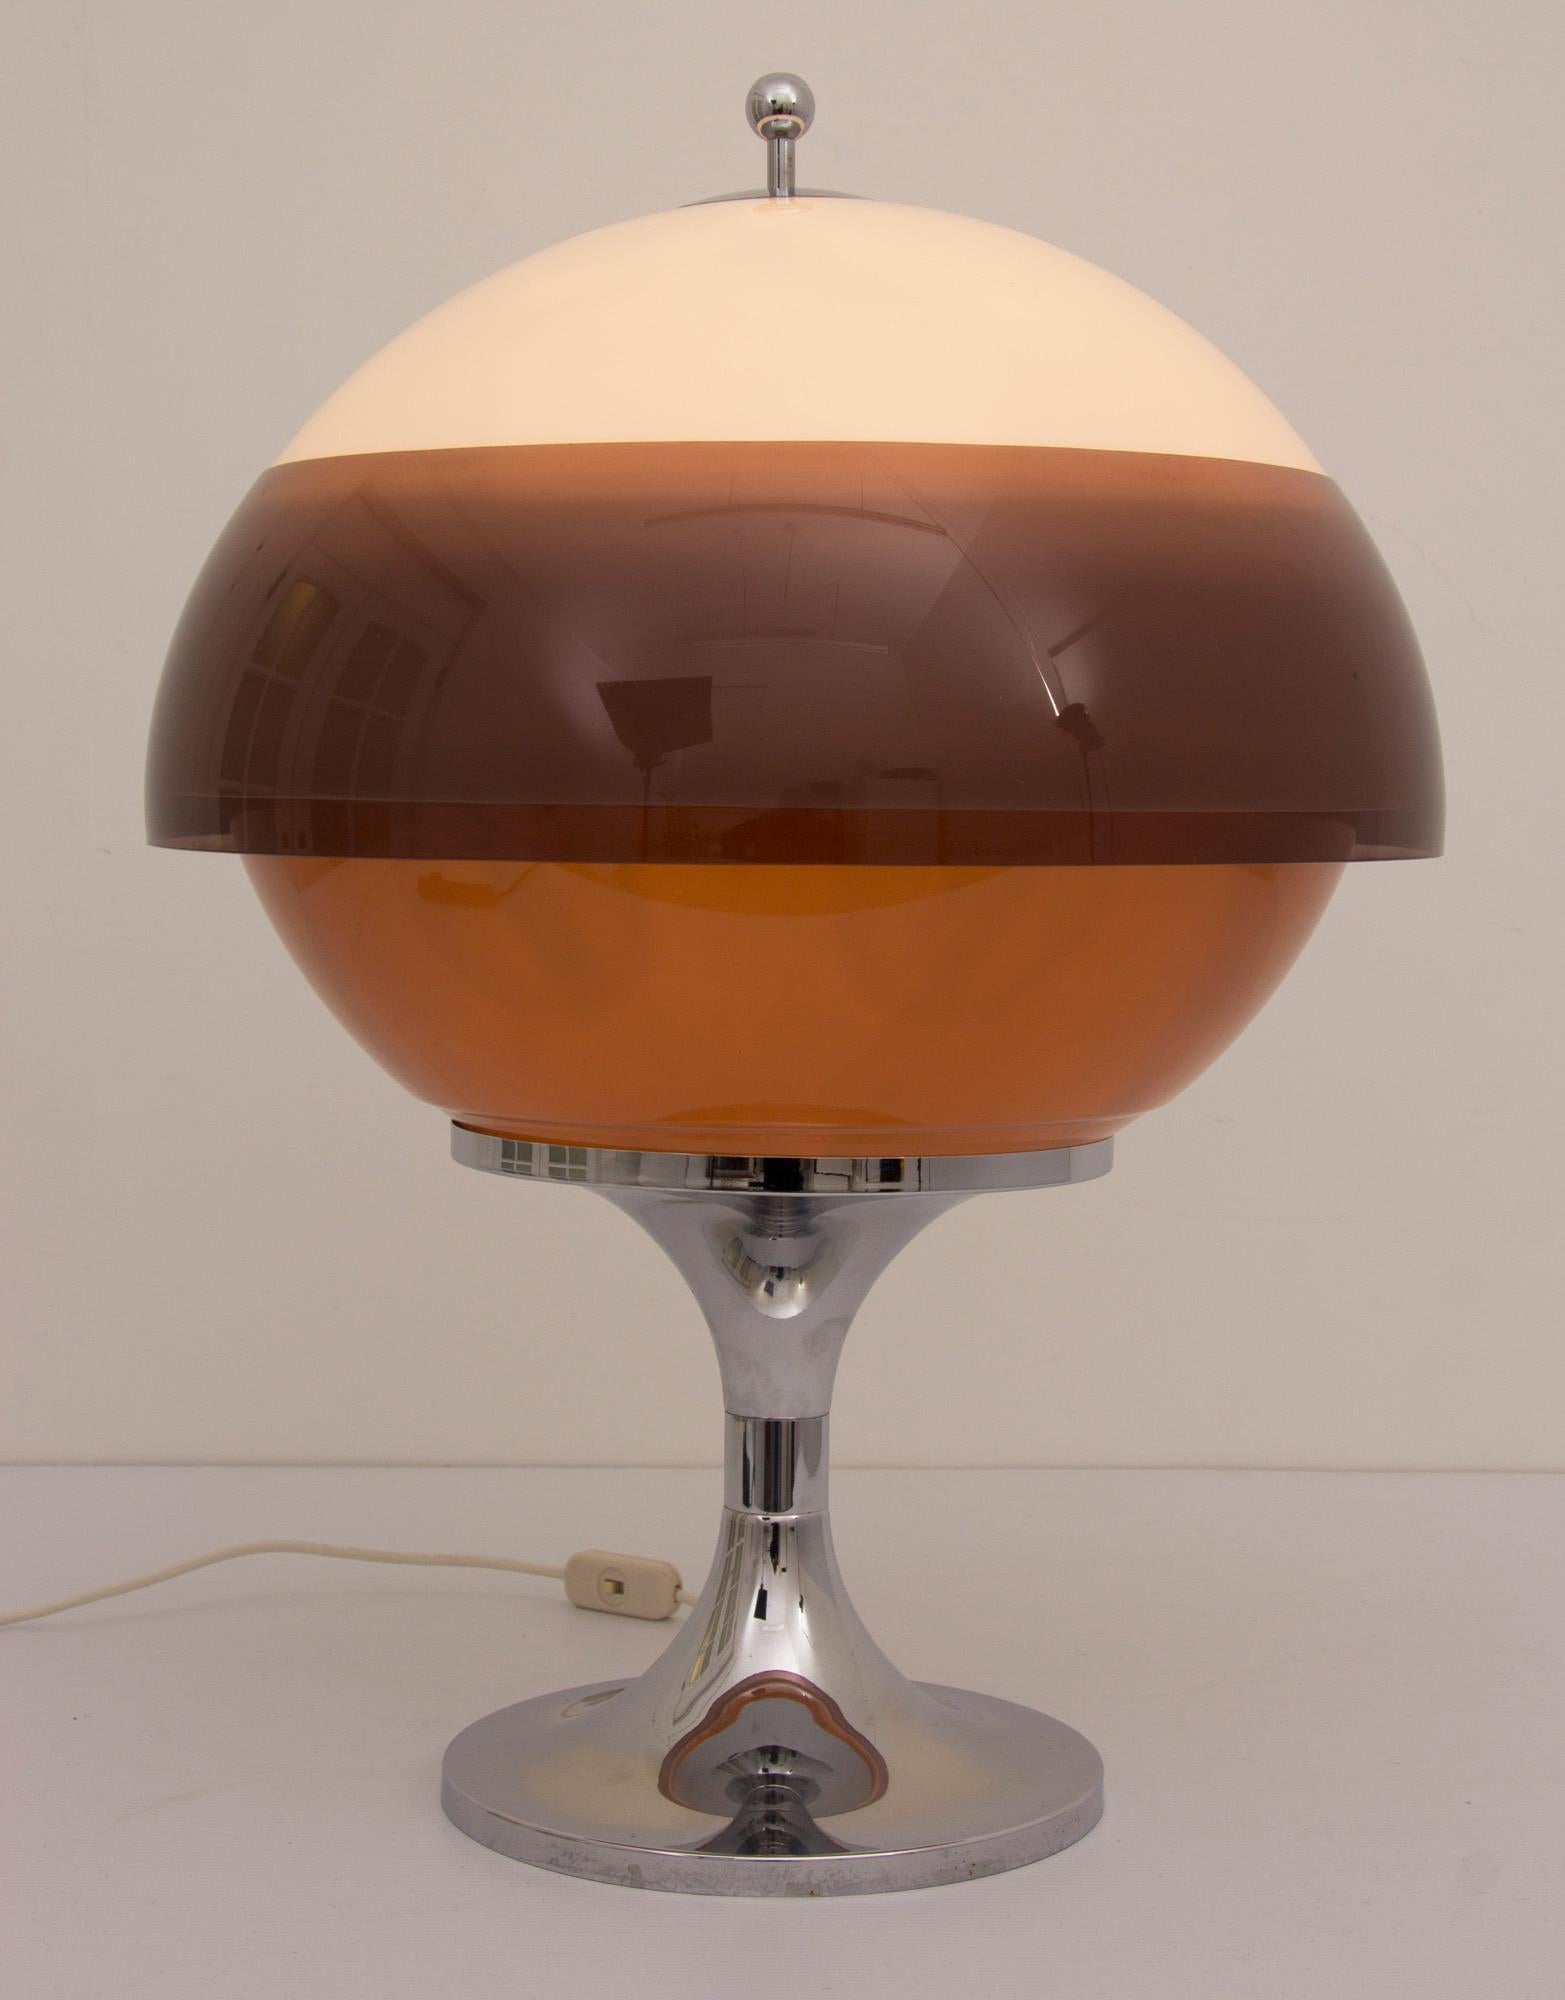 Midcentury large globe lamp, the globe in white and maroon perspex which illuminates to a burnt orange, has a loos fitting maroon Saturn ring or skirt.
Very unusual piece.
Measures: H 75 cm, W 54 cm, D 54 cm
Italy, circa 1960.